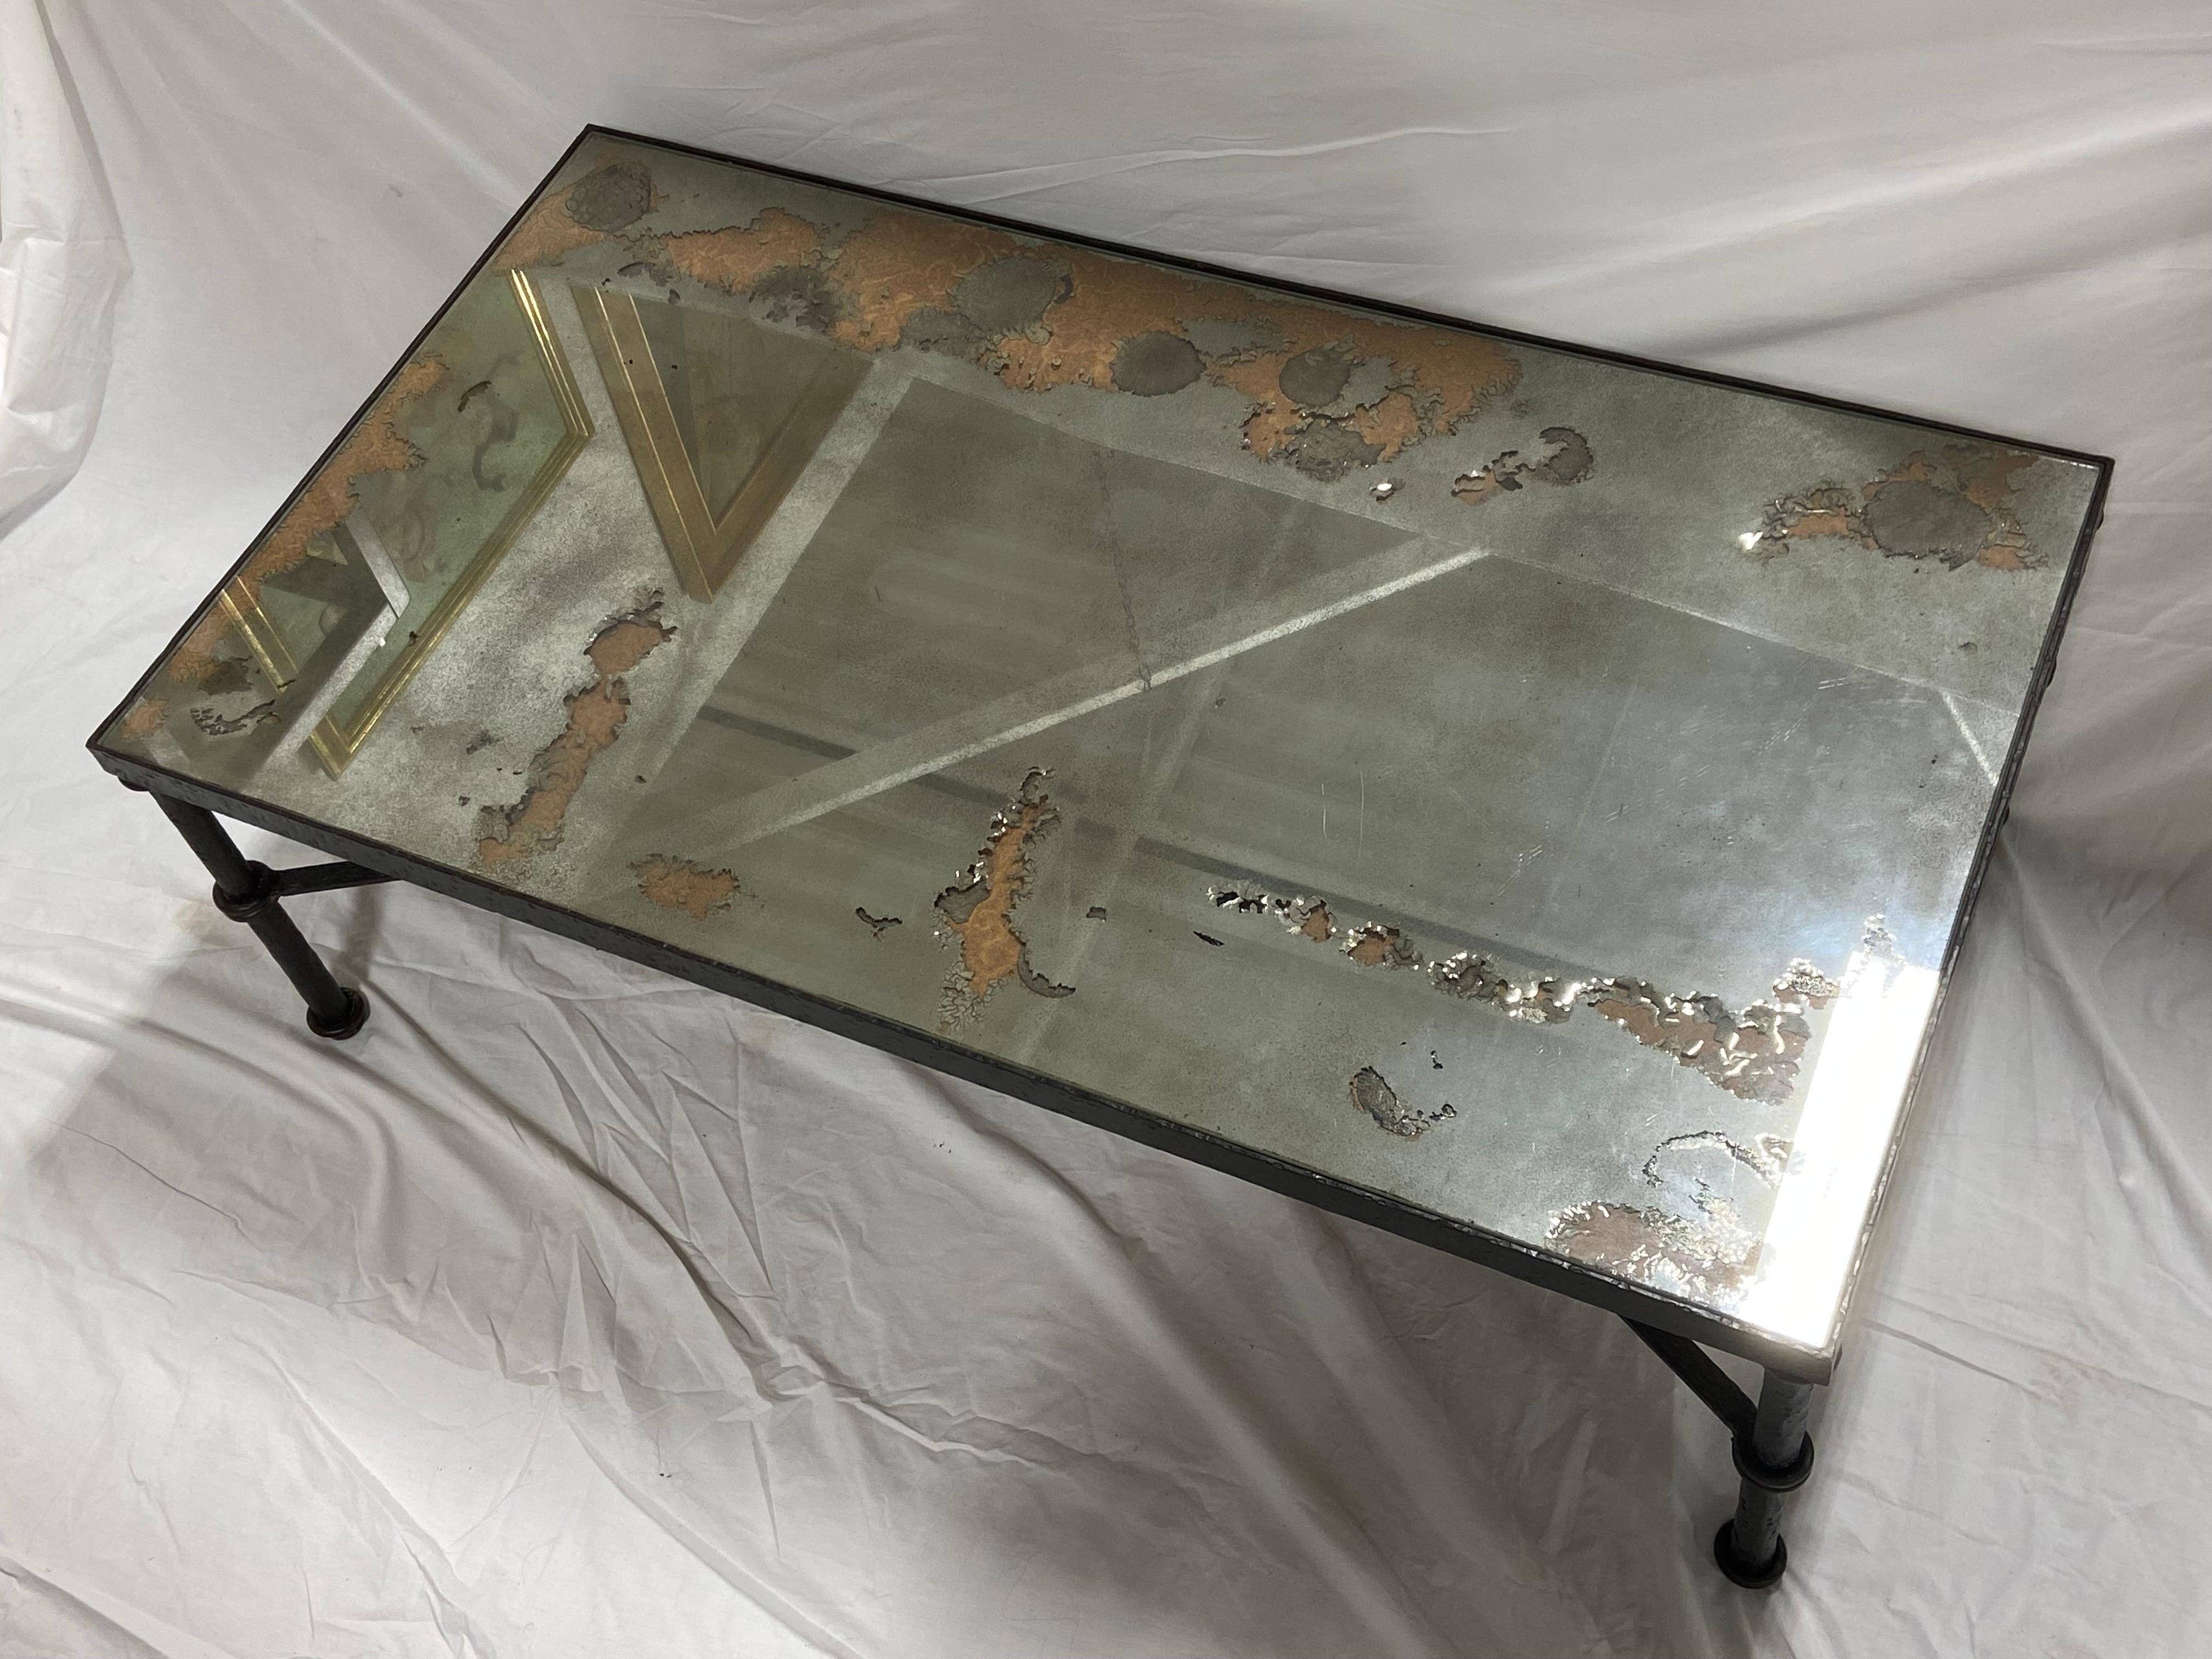 A large vintage iron coffee table with a hand hammered style finish as well as a distressed / aged mirror top. The table is in the style of works by Diego Giacometti. Through the distressed mirror top in certain areas, the backing support is